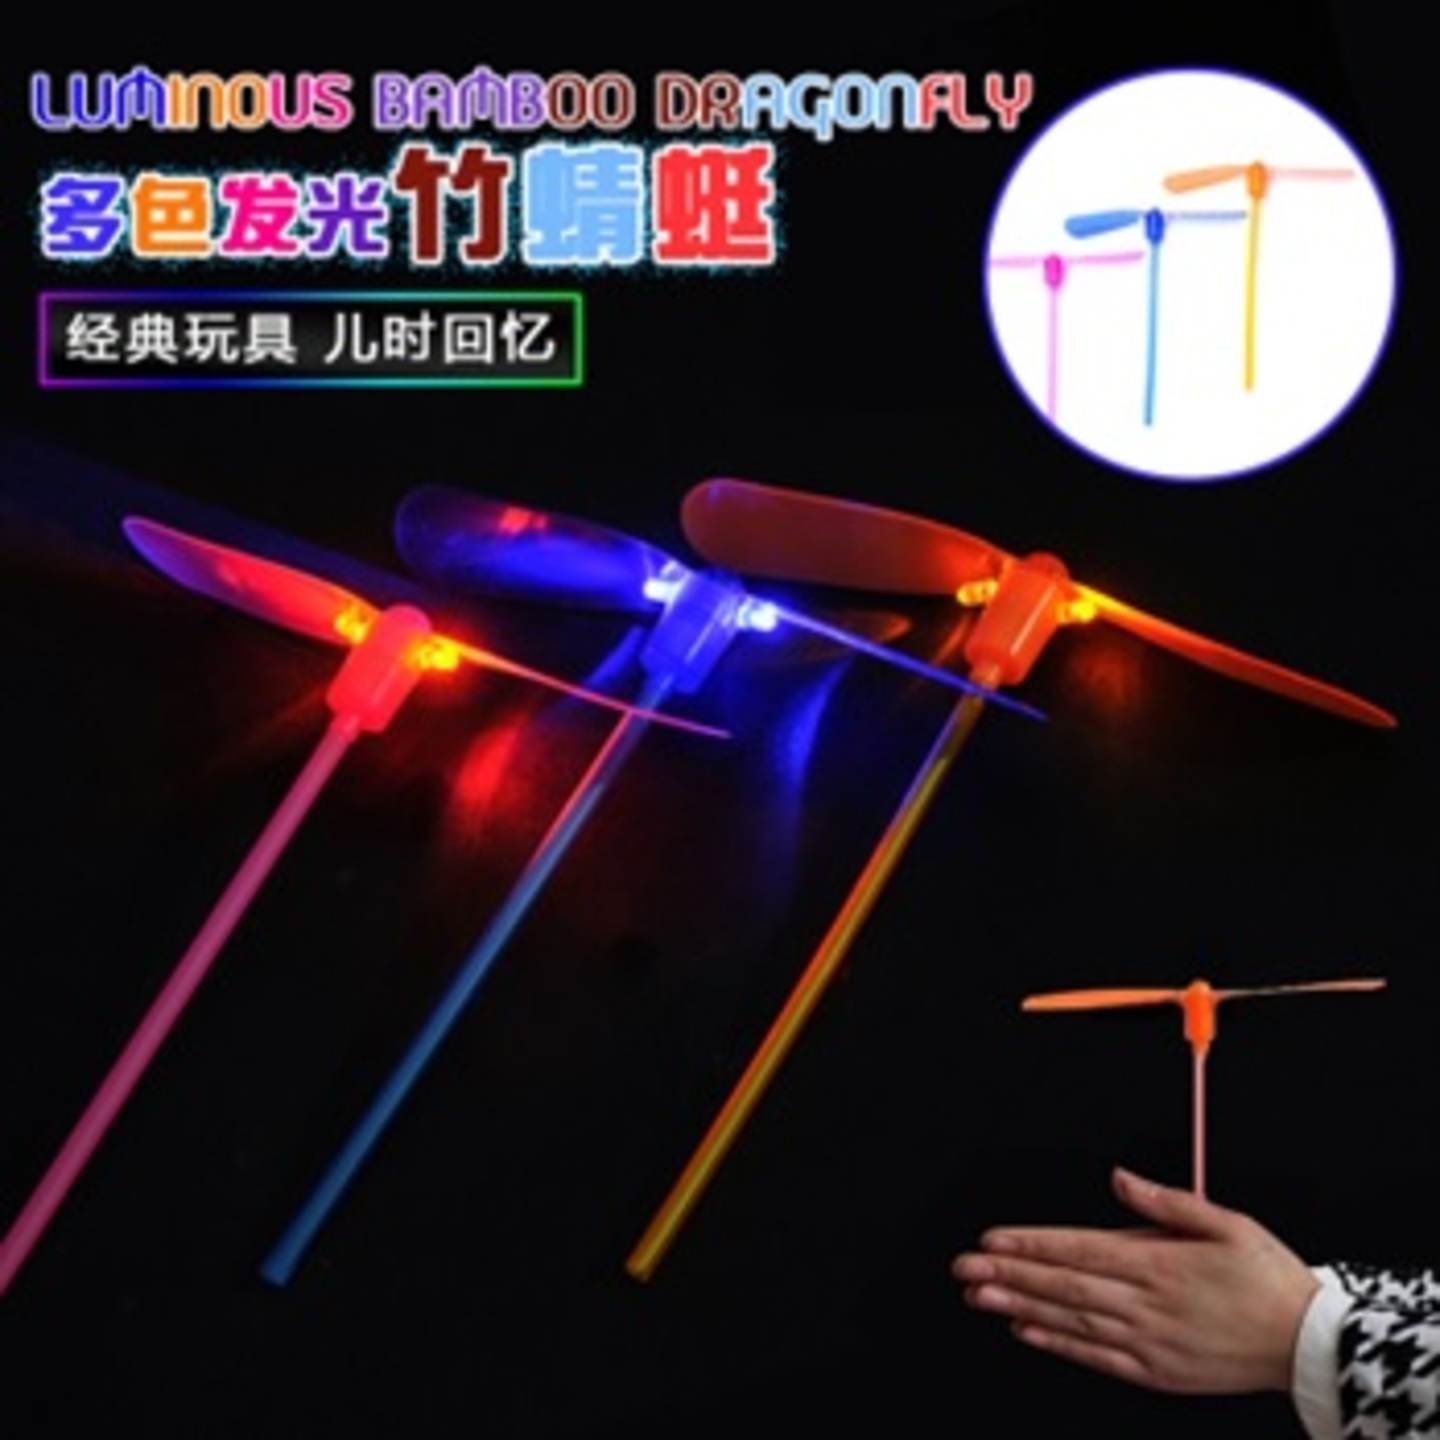 LED Dragonfly with Flashing Lights